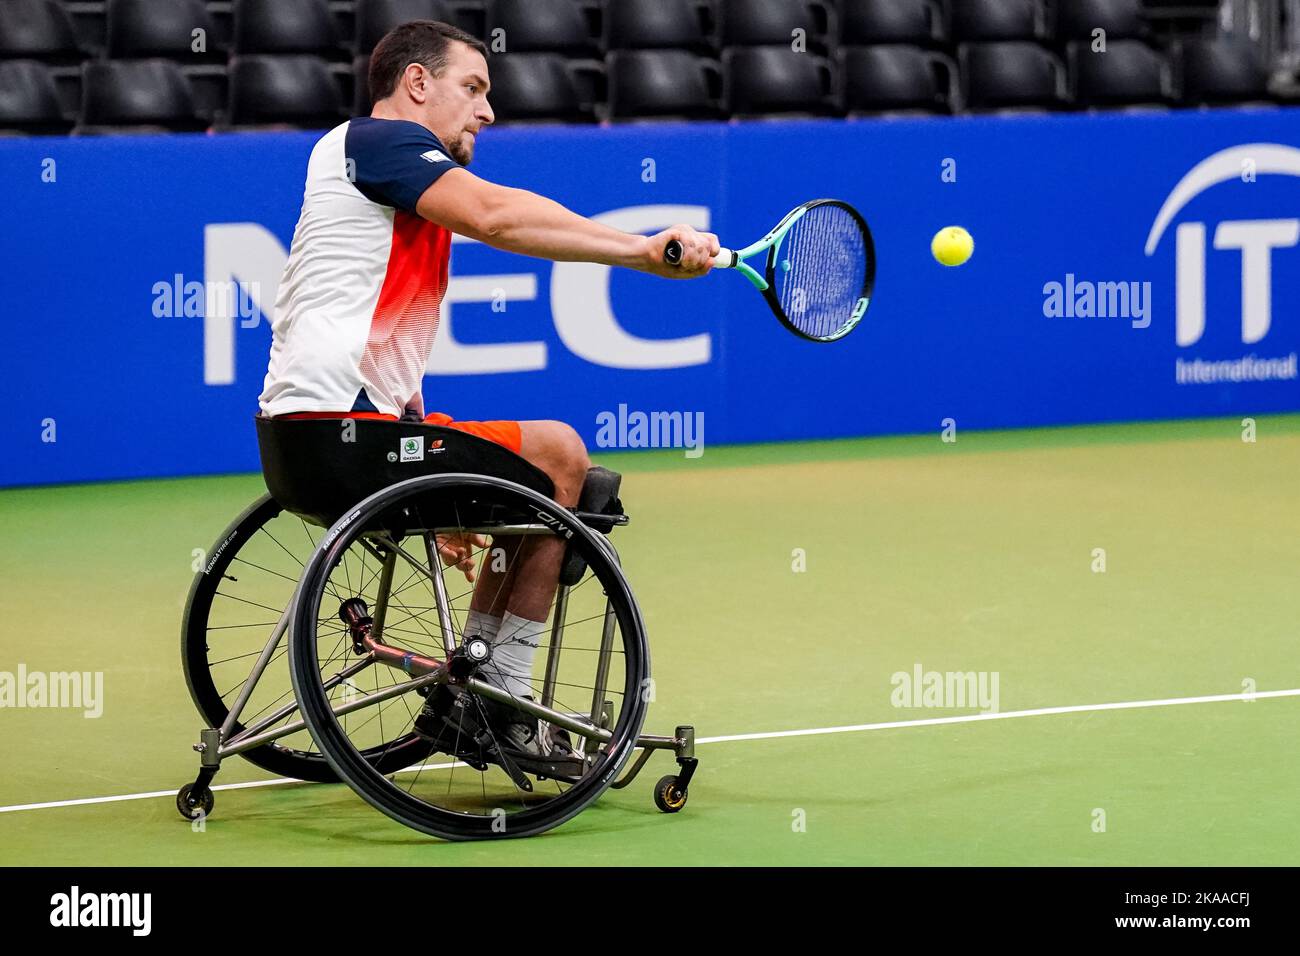 OSS, NETHERLANDS - NOVEMBER 1: Joachim Gerard of Belgium plays a backhand in his men's singles match against Gustavo Fernandez of Argentina during Day 3 of the 2022 ITF Wheelchair Tennis Masters at Sportcentrum de Rusheuvel on November 1, 2022 in Oss, Netherlands (Photo by Rene Nijhuis/Orange Pictures) Stock Photo